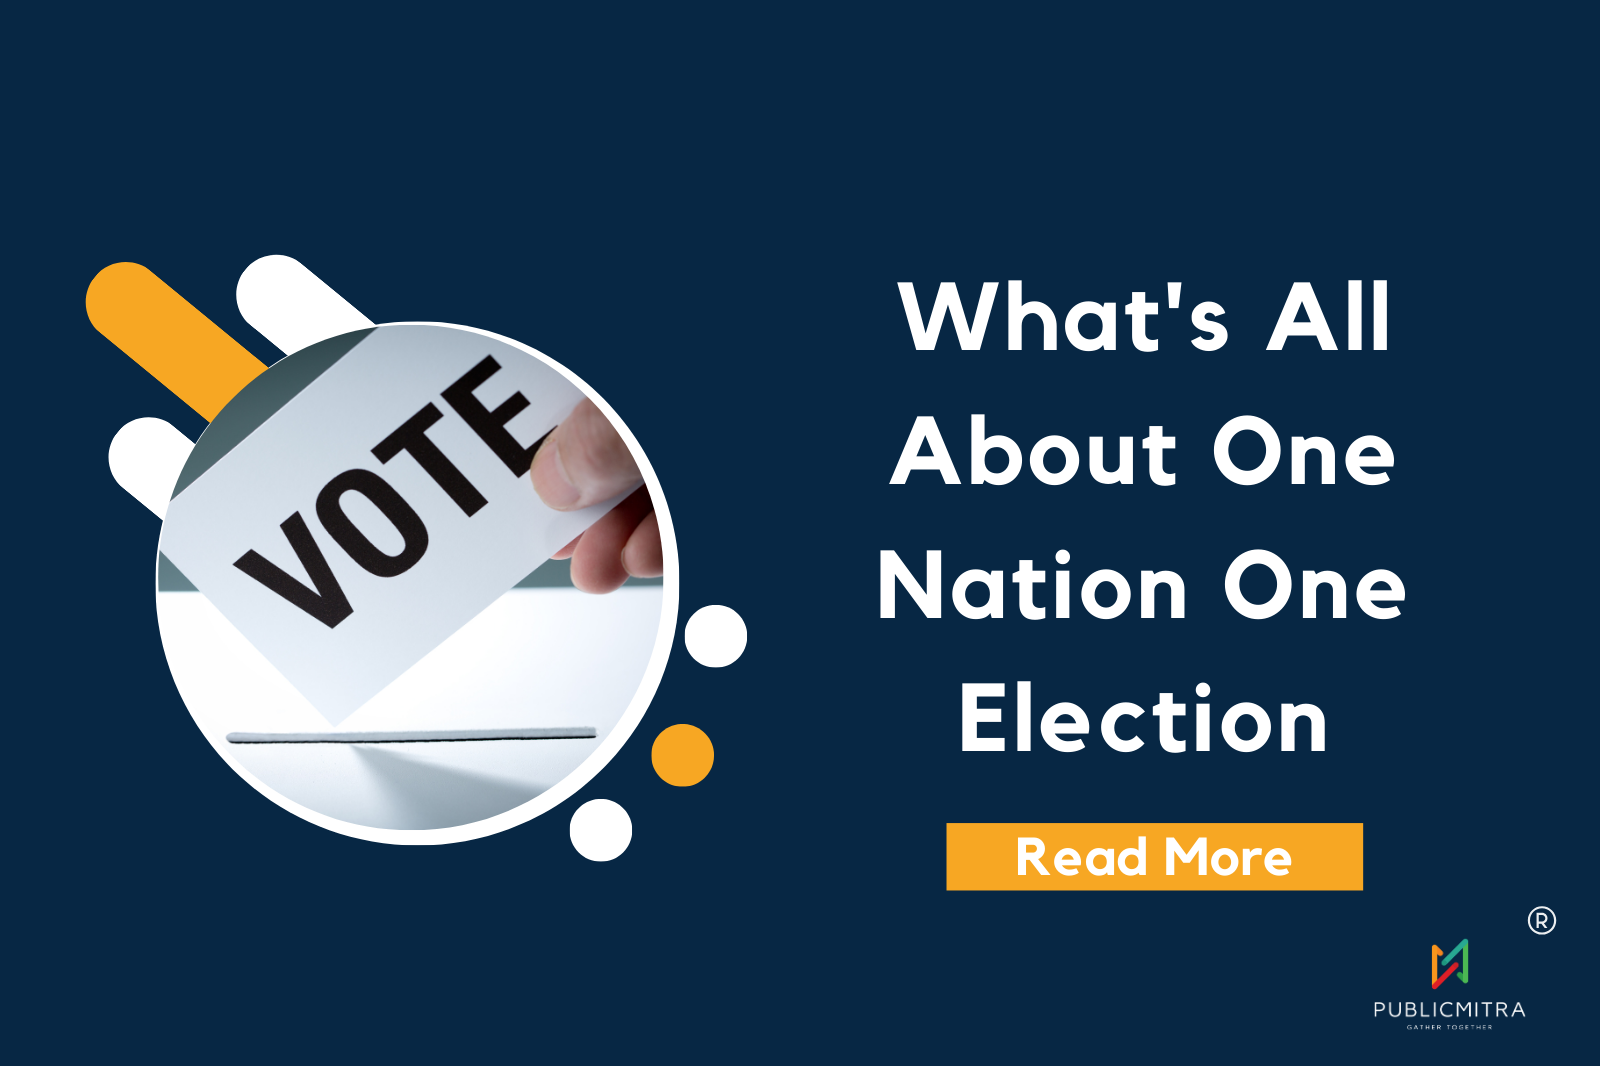 one-nation-one-election